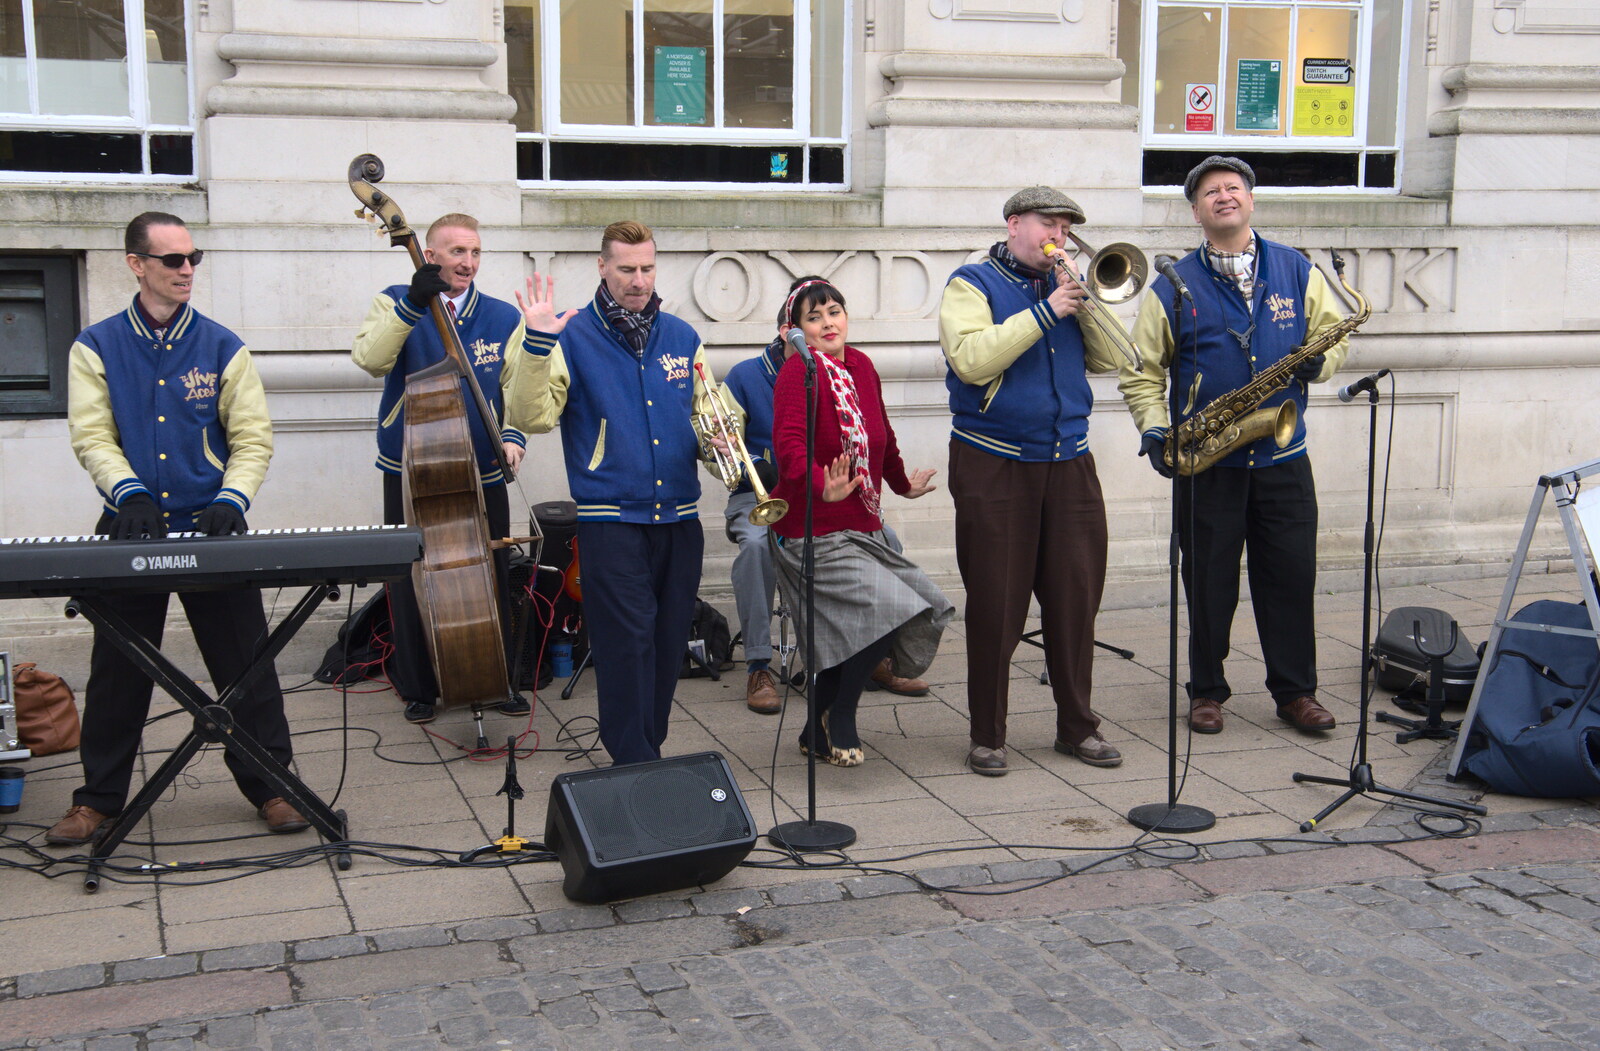 The Jive Aces are playing outside Lloyds Bank from A Trip to Cooke's Music, St. Benedict's Street, Norwich - 14th March 2020